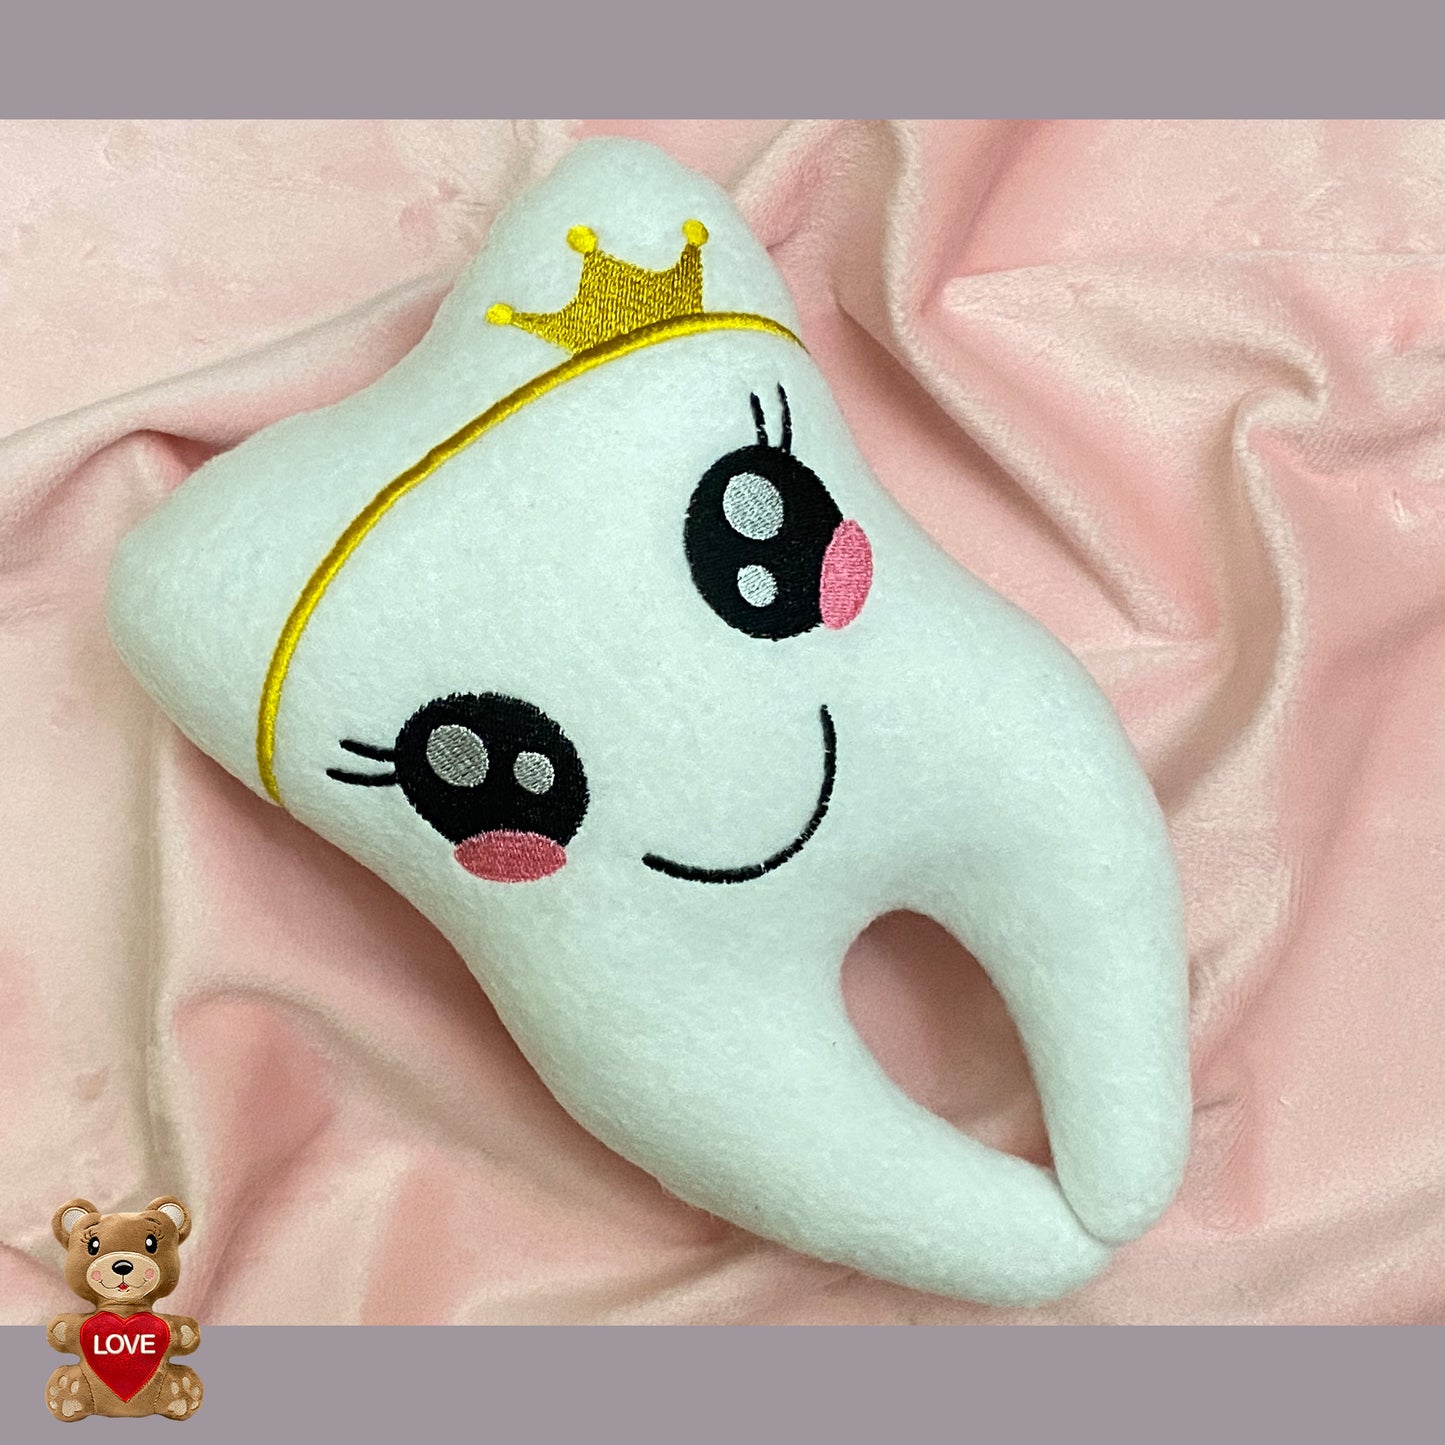 Personalised embroidery Plush Soft Toy Tooth ,Super cute personalised soft plush toy, Personalised Gift, Unique Personalized Birthday Gifts , Custom Gifts For Children